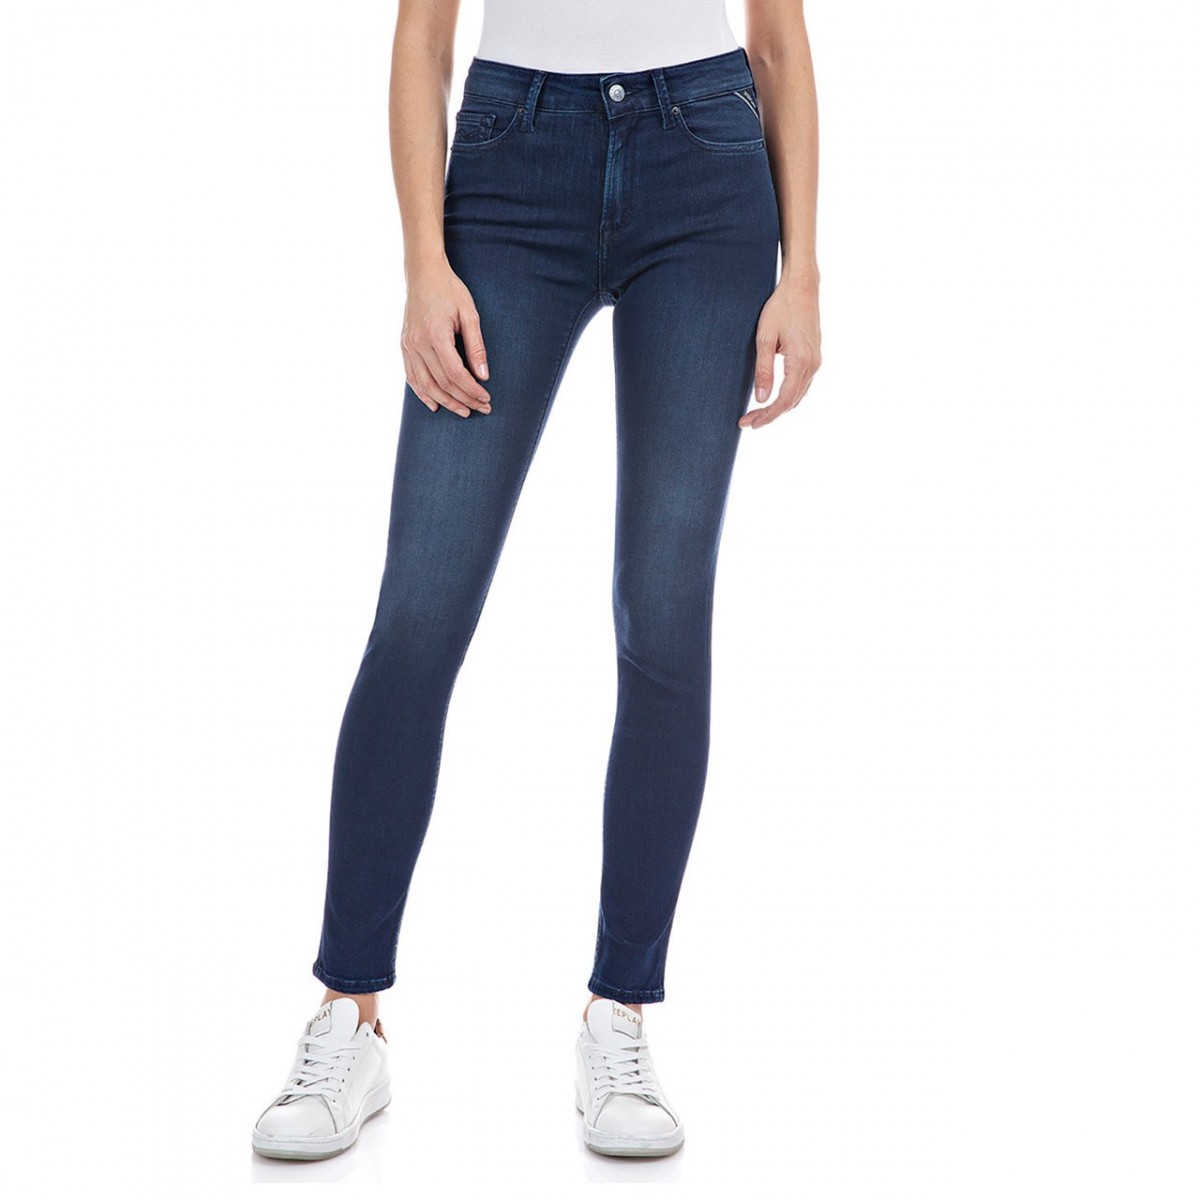 Replay | Skinny Luzien Jeans, Blue | RPY_WHW689.028.41A 771 007